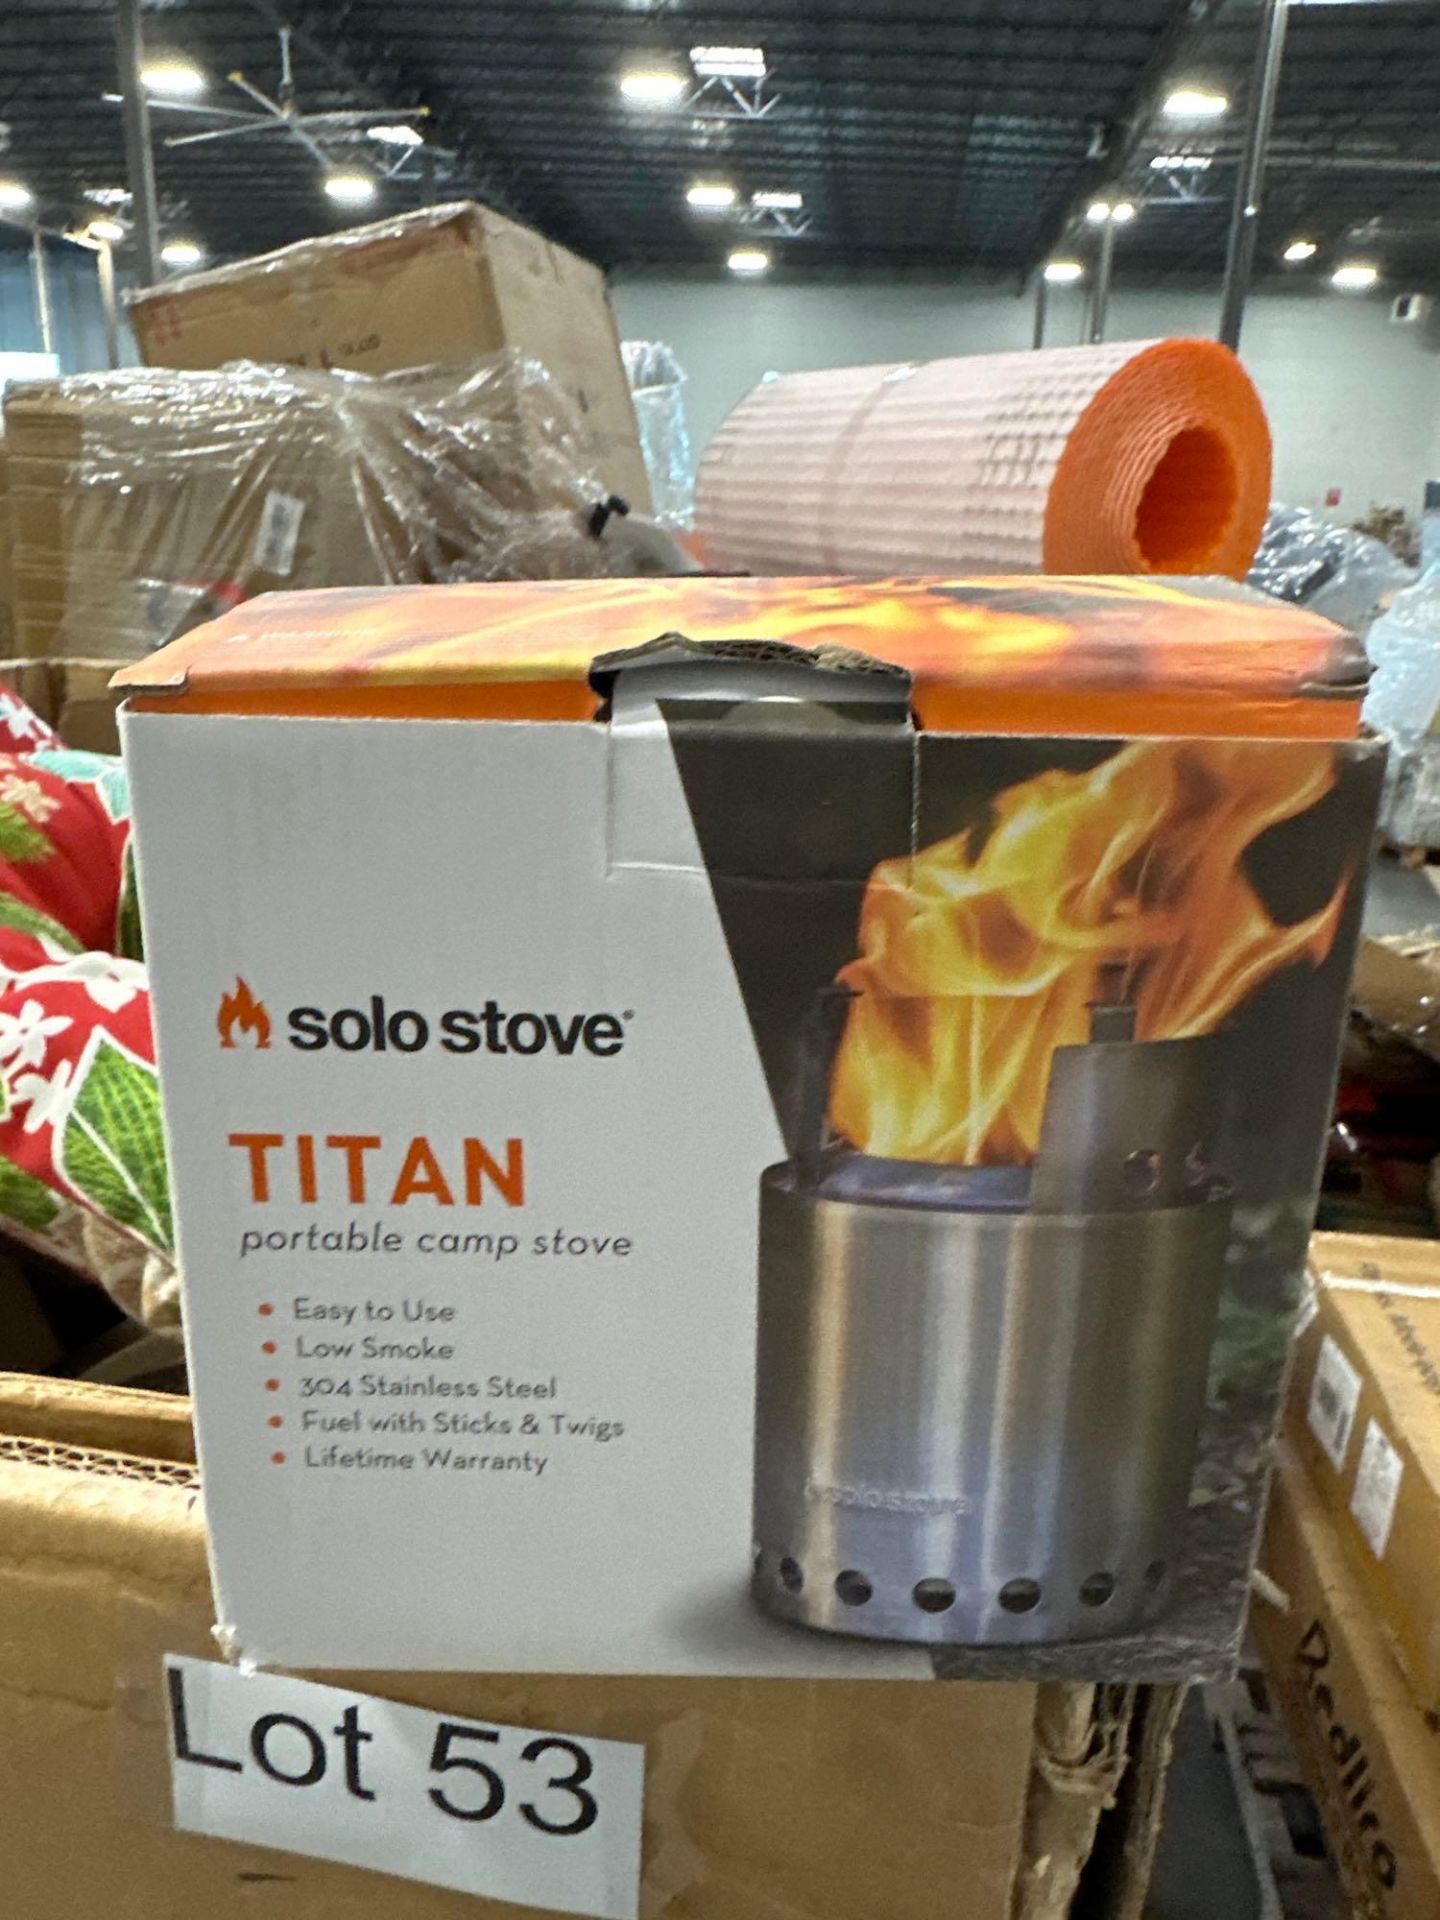 Pallet- titan solo stove, cushions, bowls, toys, home decor, books and more - Image 2 of 9